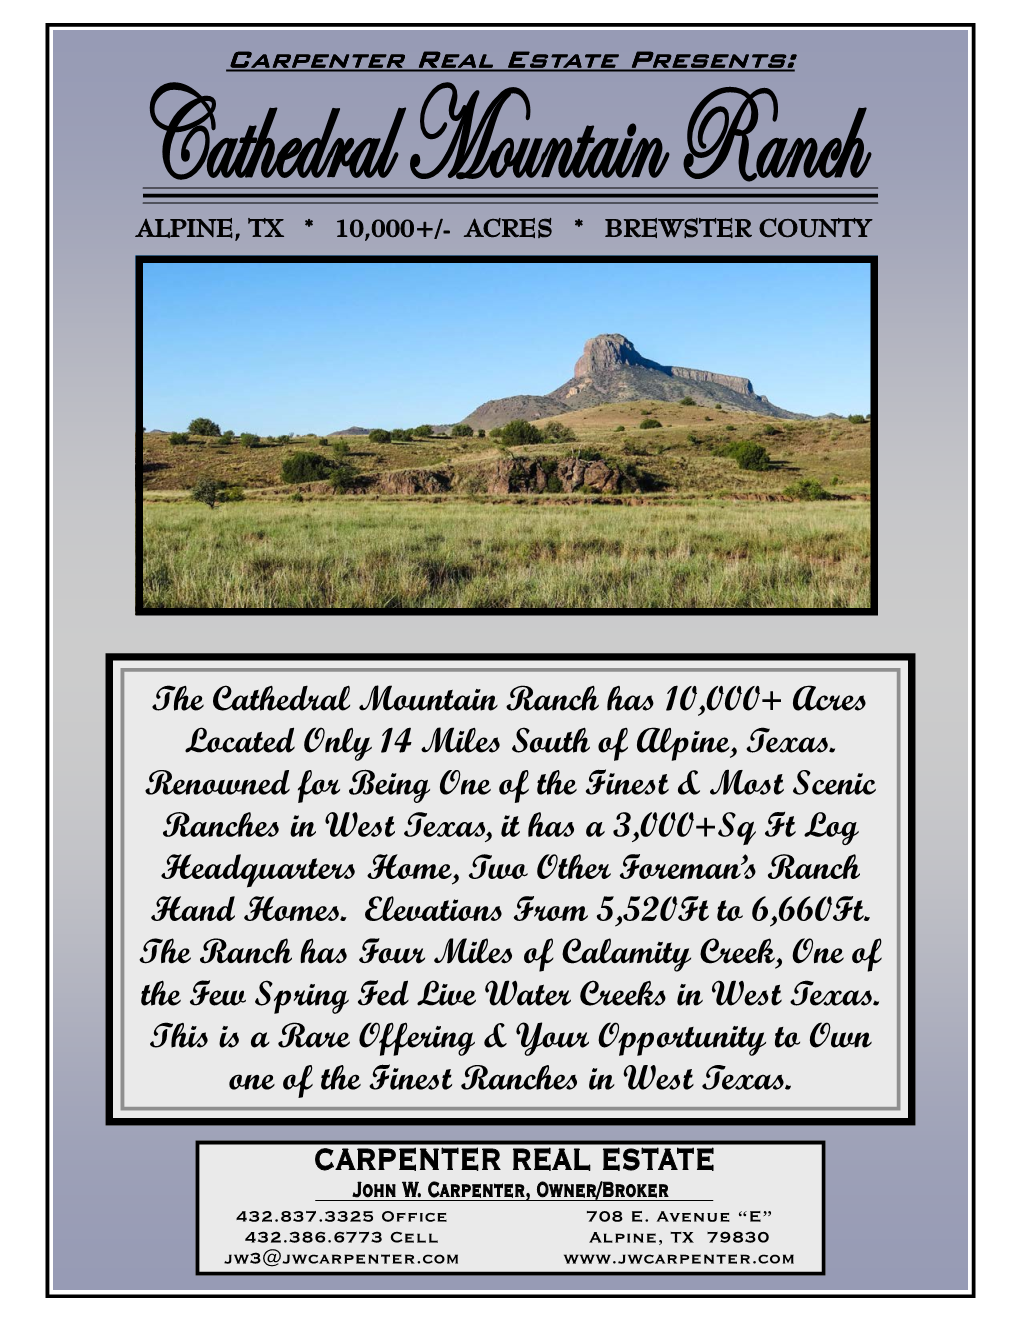 Cathedral Mountain Ranch Has 10,000+ Acres Located Only 14 Miles South of Alpine, Texas